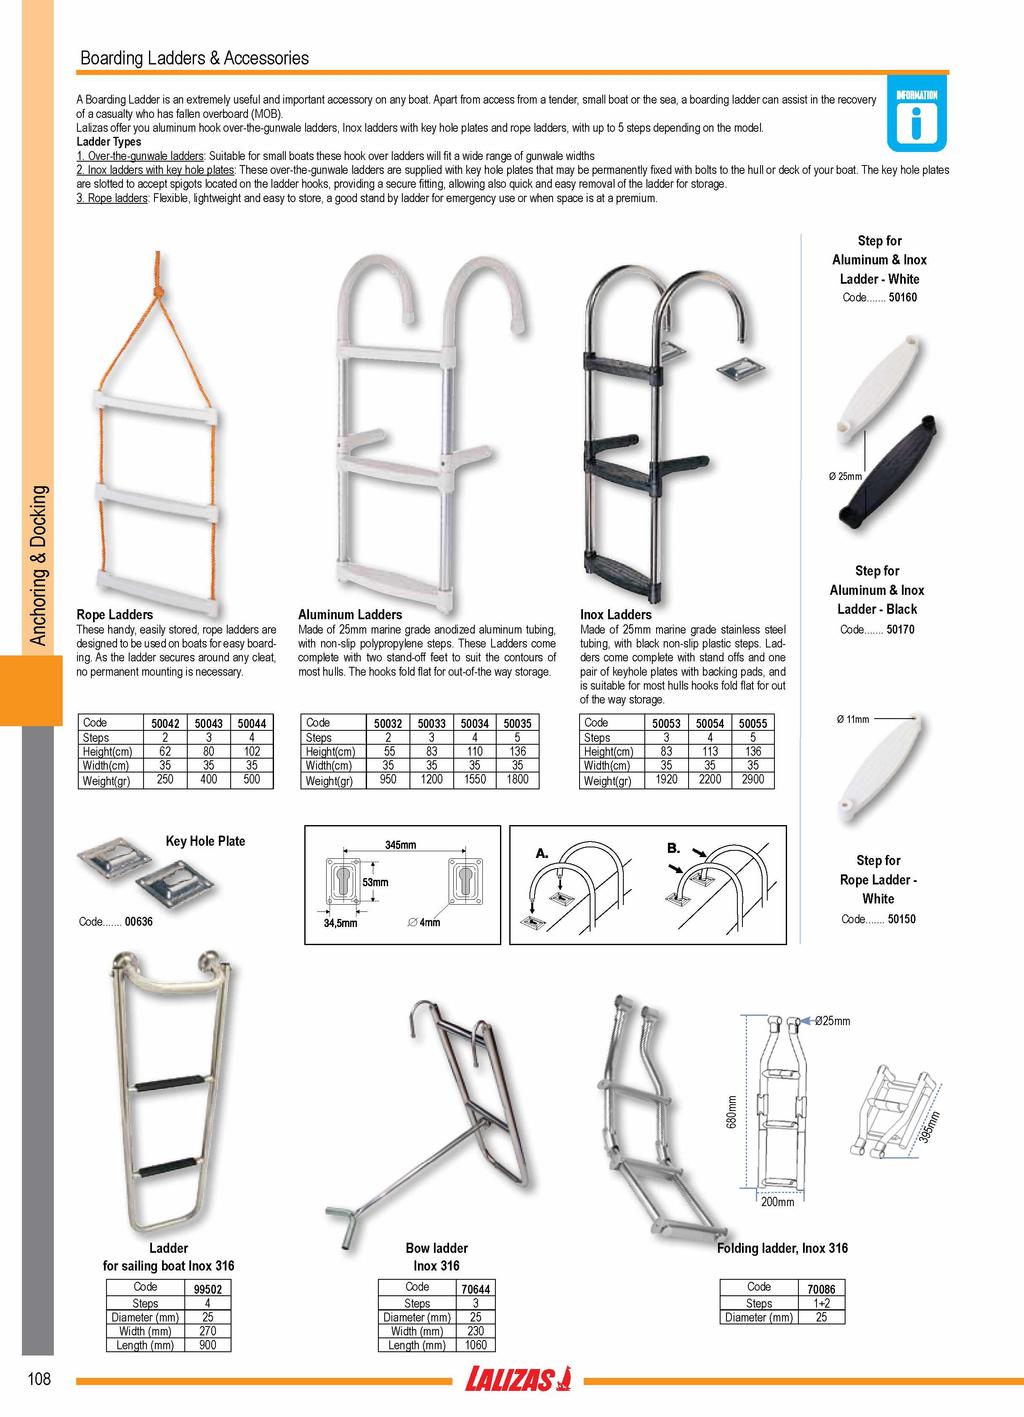 Boarding Ladders & Accessories A Boarding Ladder is an extrem ely useful and im portant accessory on any boat.